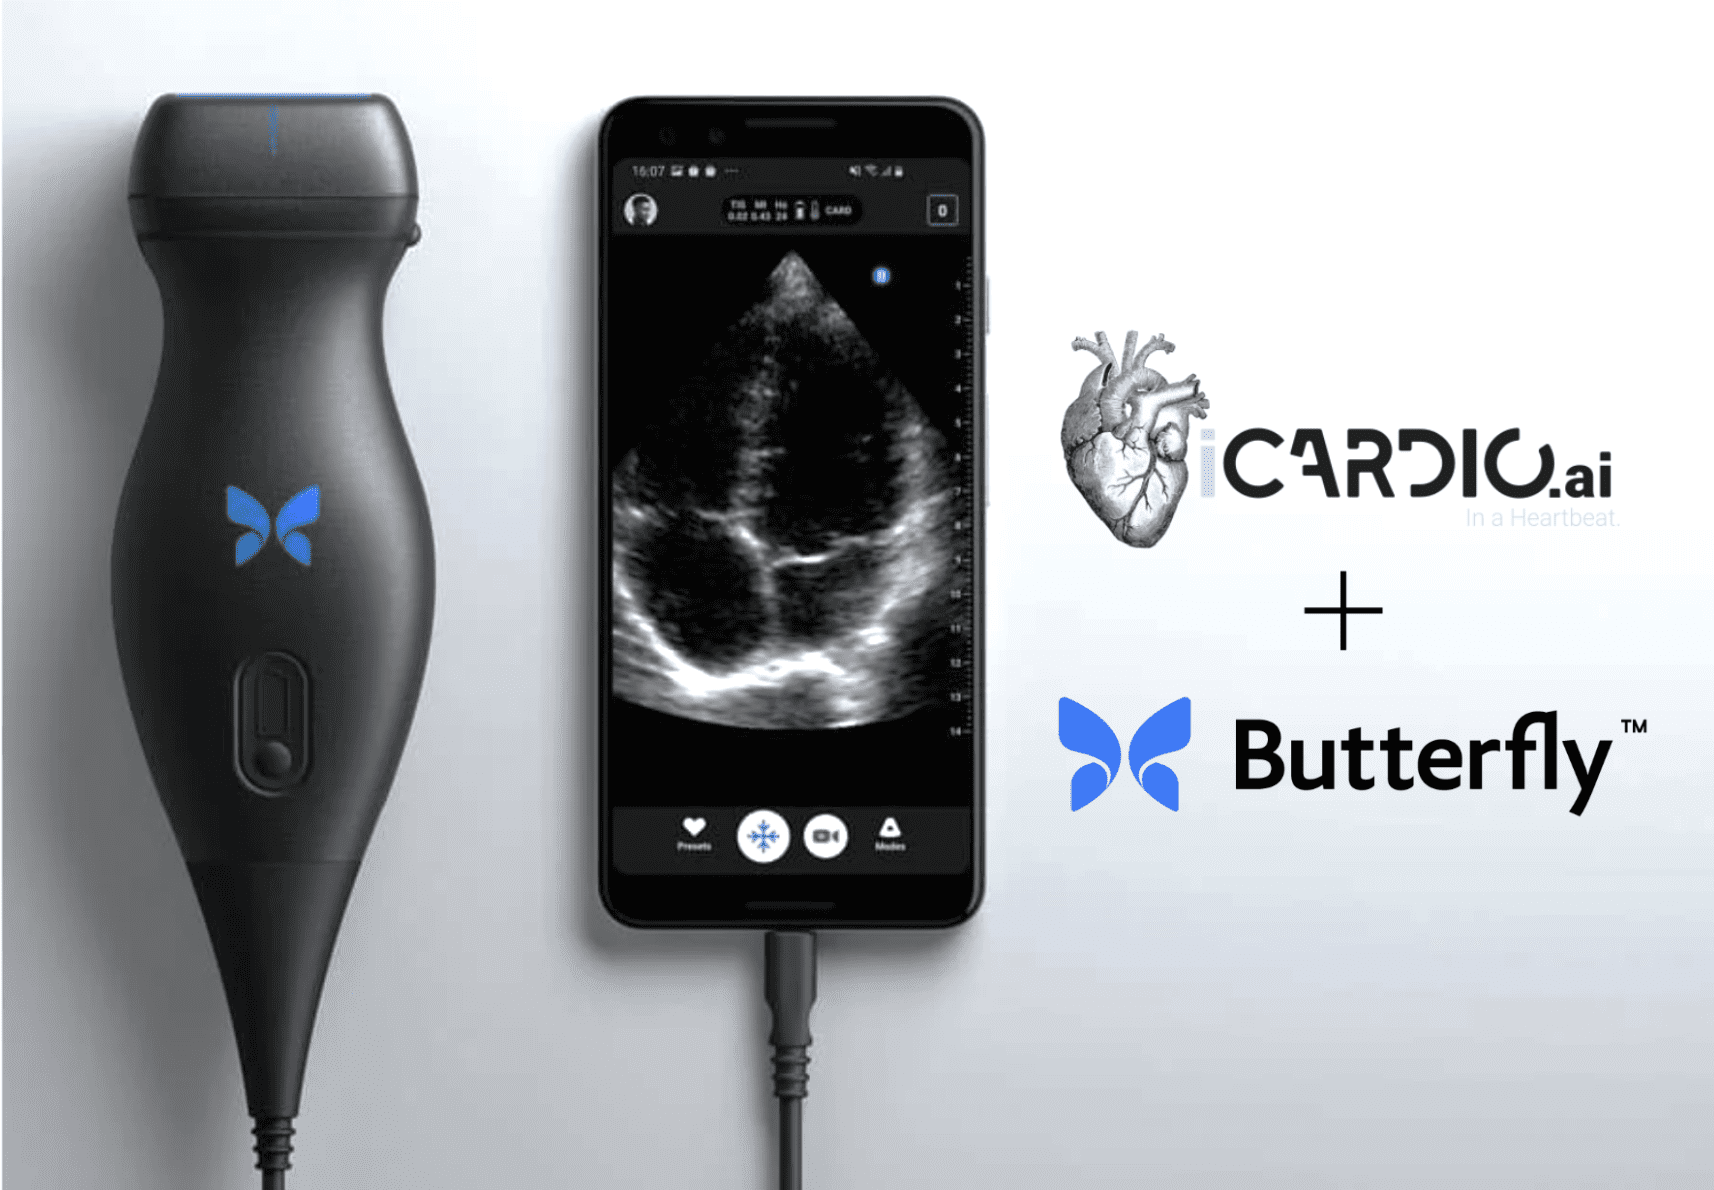 Butterfly Network, iCardio.ai Partner to Deploy Cardiac Ultrasound AI Tools